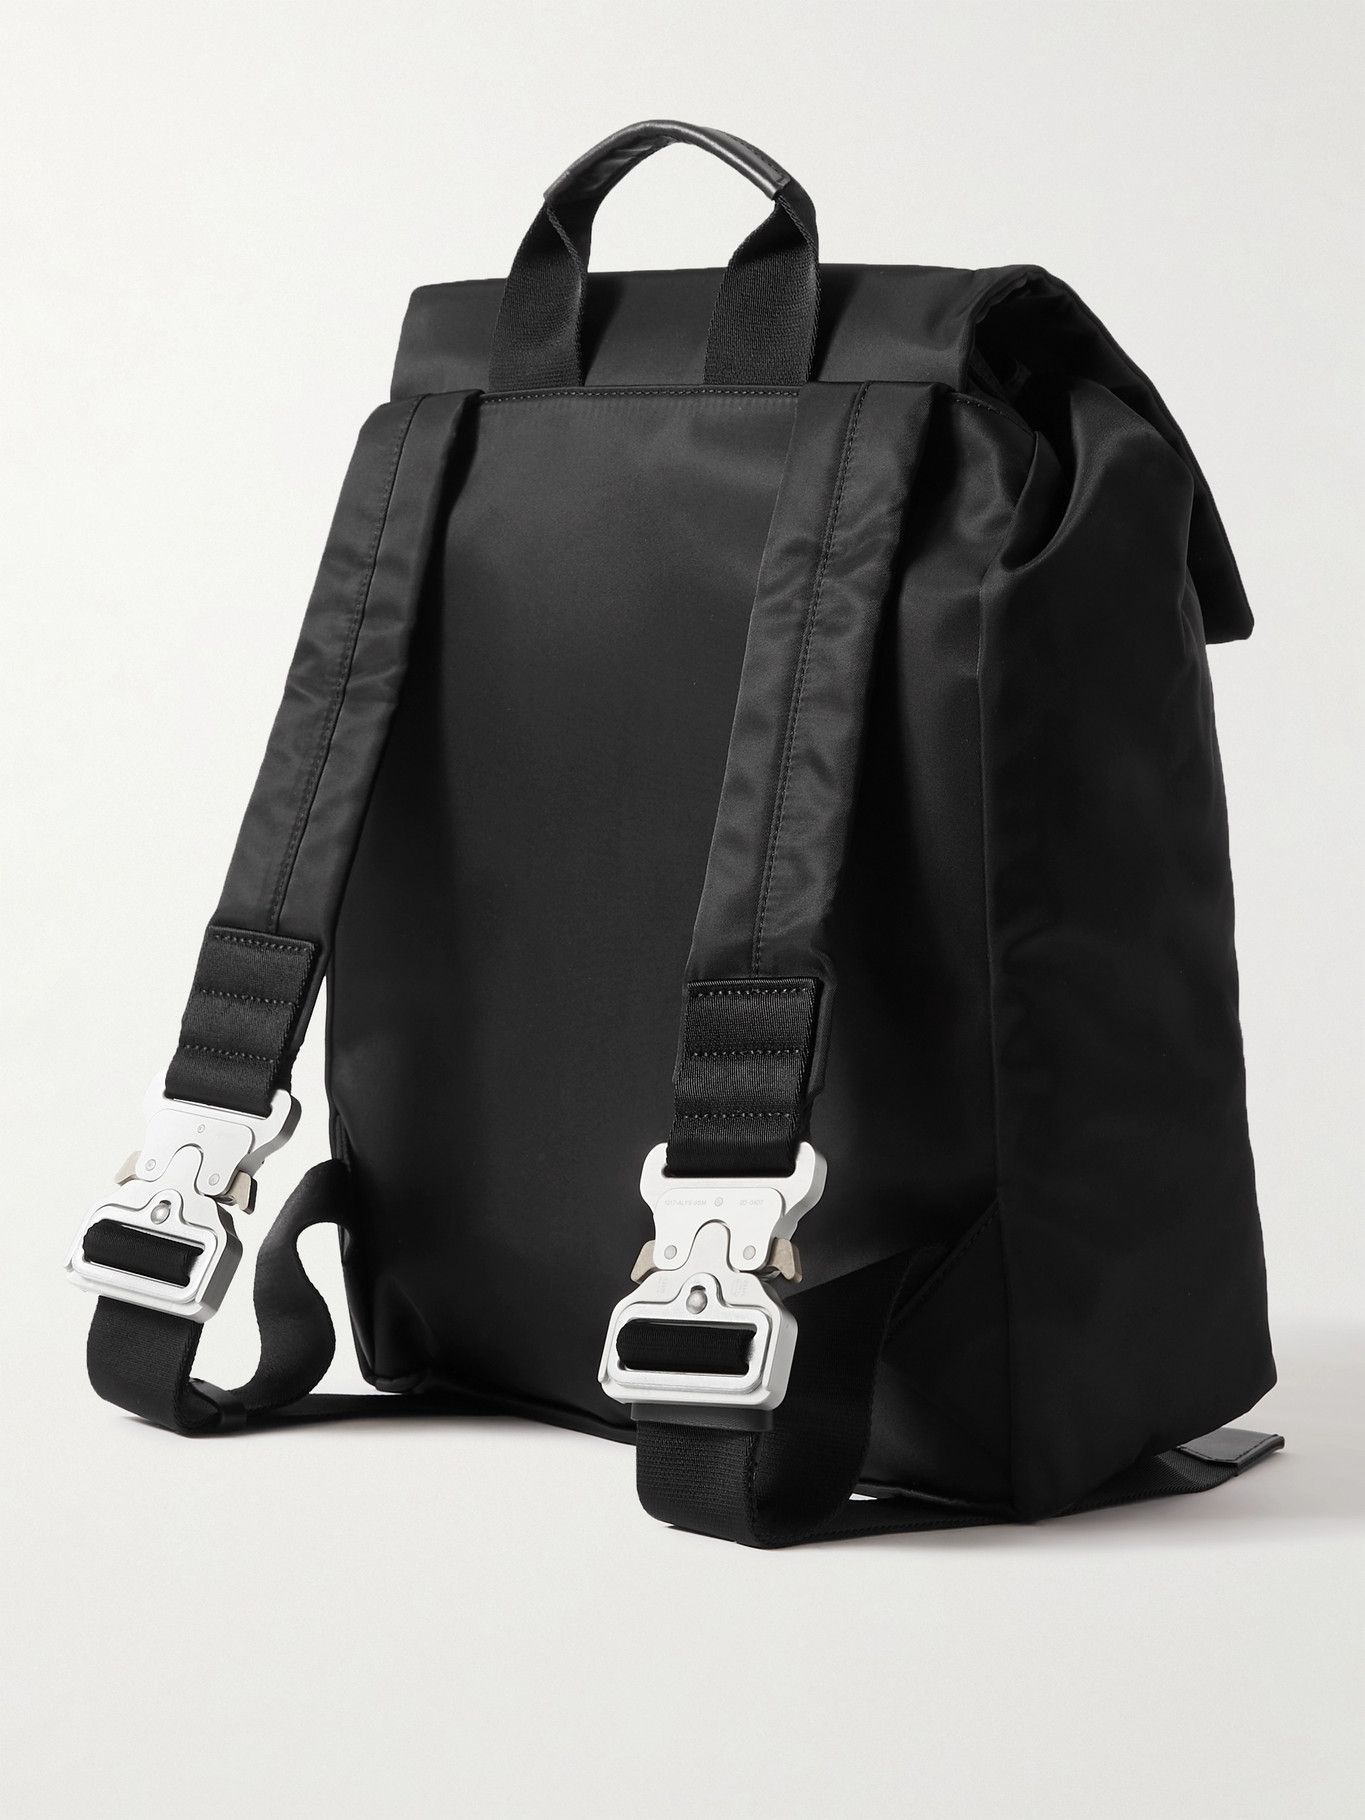 1017 ALYX 9SM - Leather-Trimmed Nylon Backpack